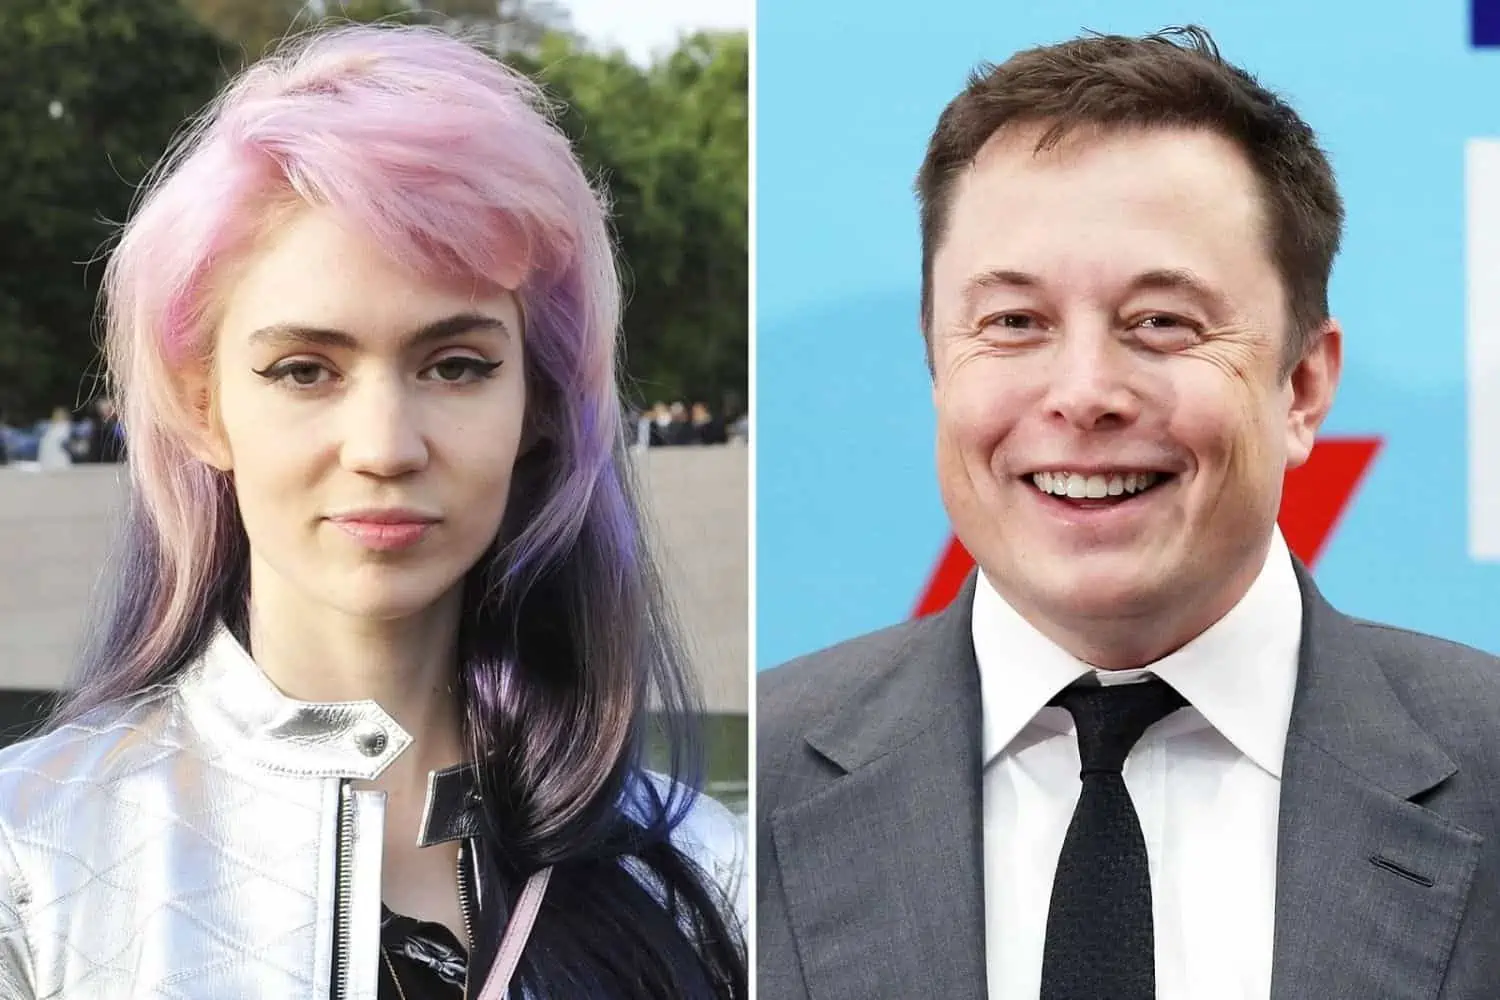 Elon Musk and Grimes secretly welcomed a second child in December